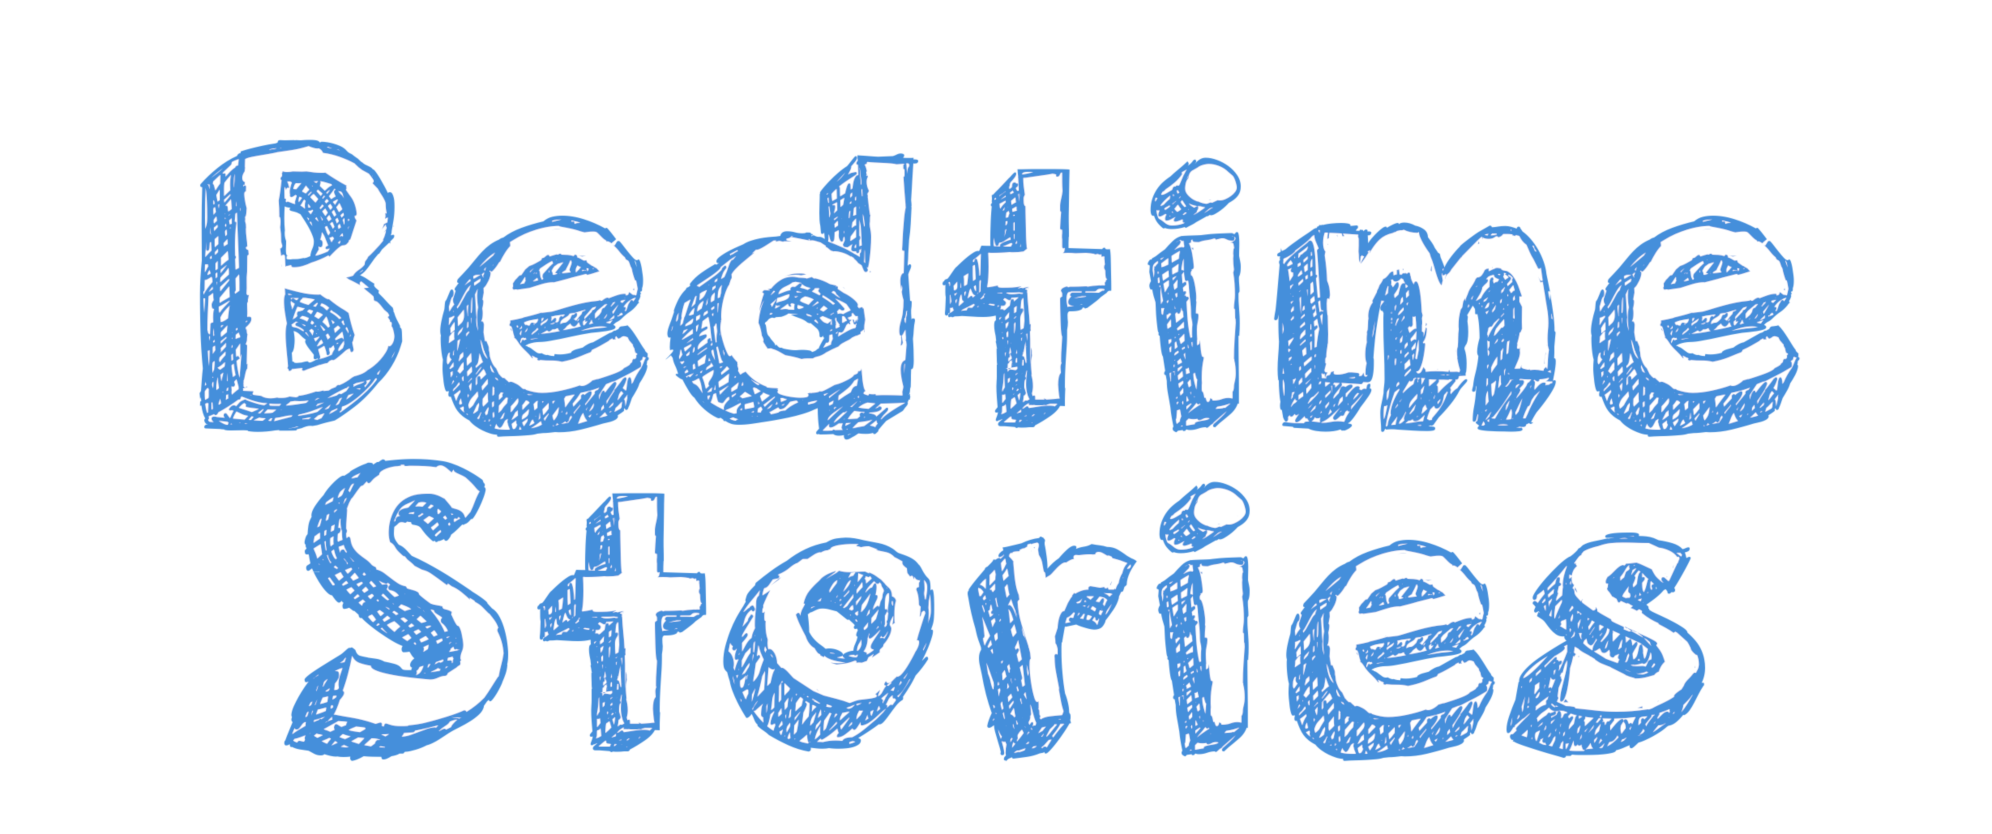 Dylan Brody’s Bedtime Stories 